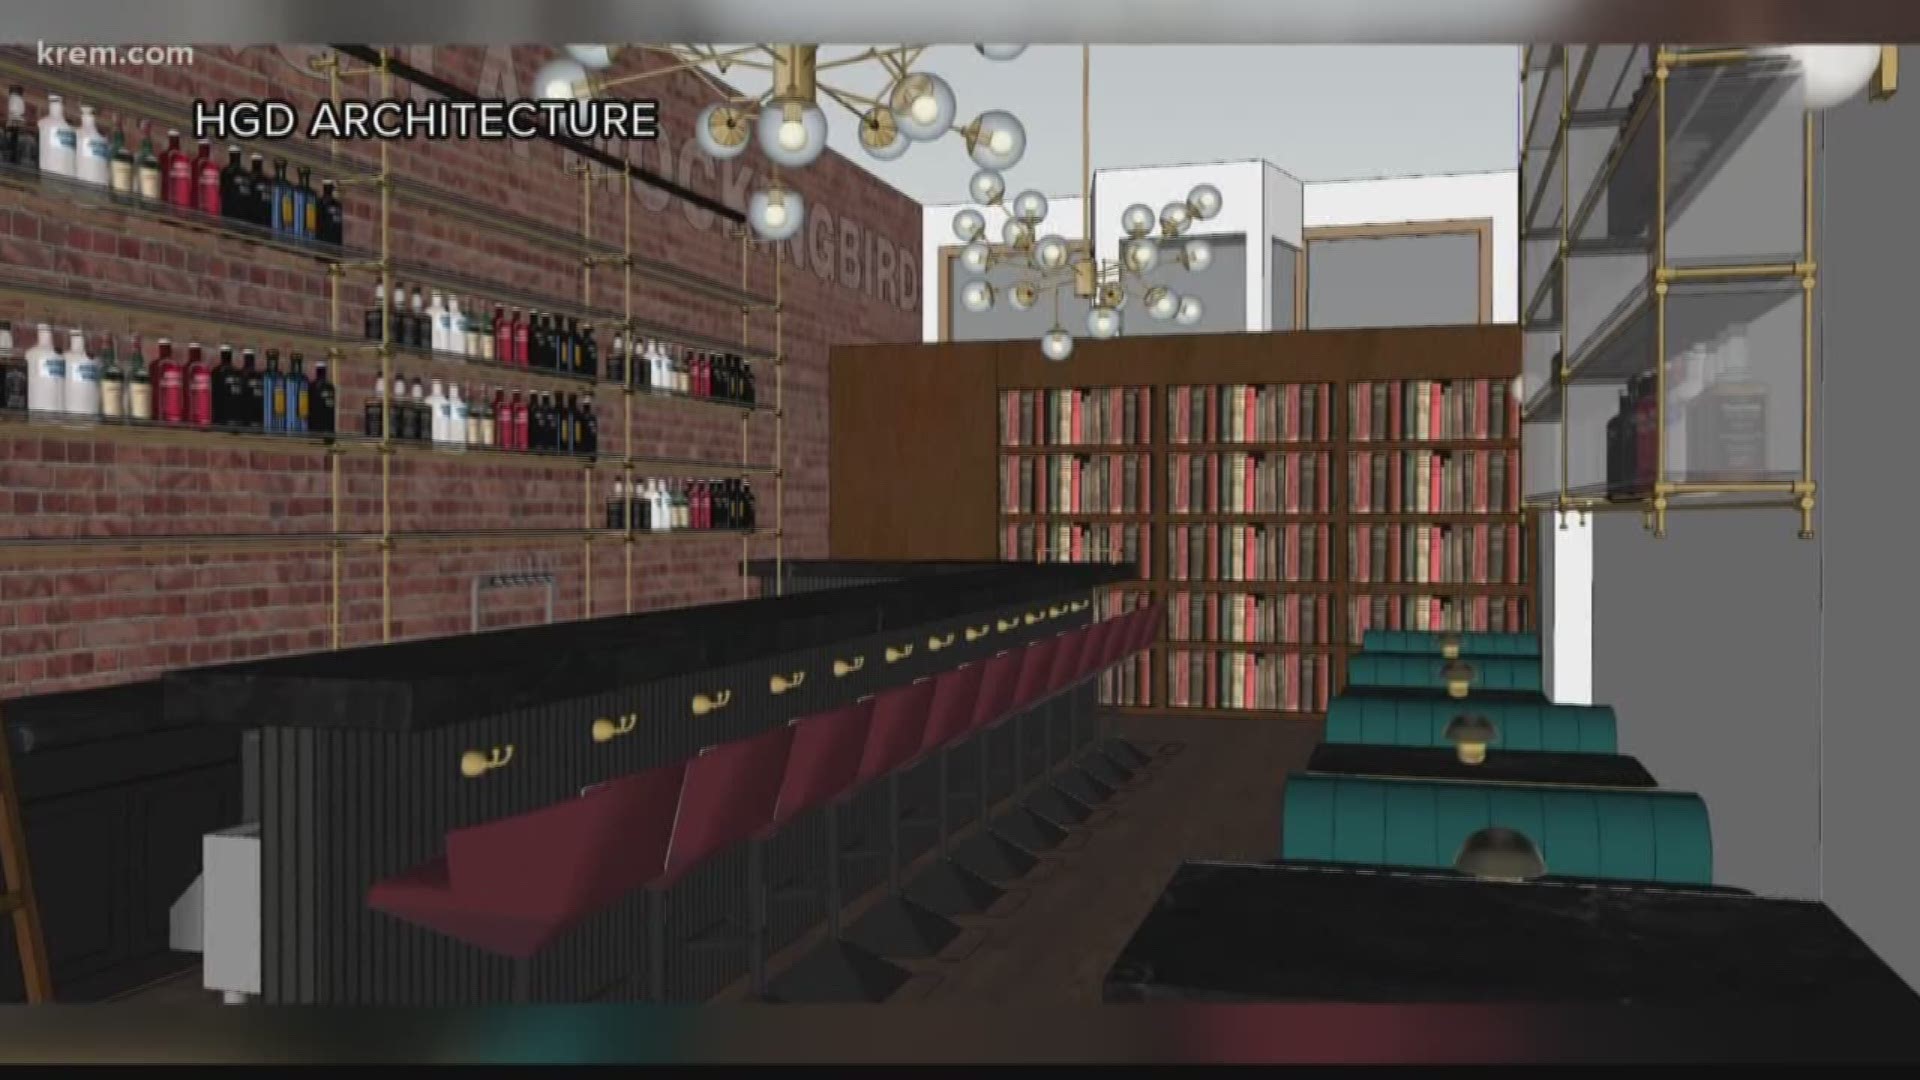 A speakeasy bar is coming to downtown Spokane. It's called, "Scofflaw's Books." KREM 2's Amanda Roley shares a peek at what we can expect when it opens next month.